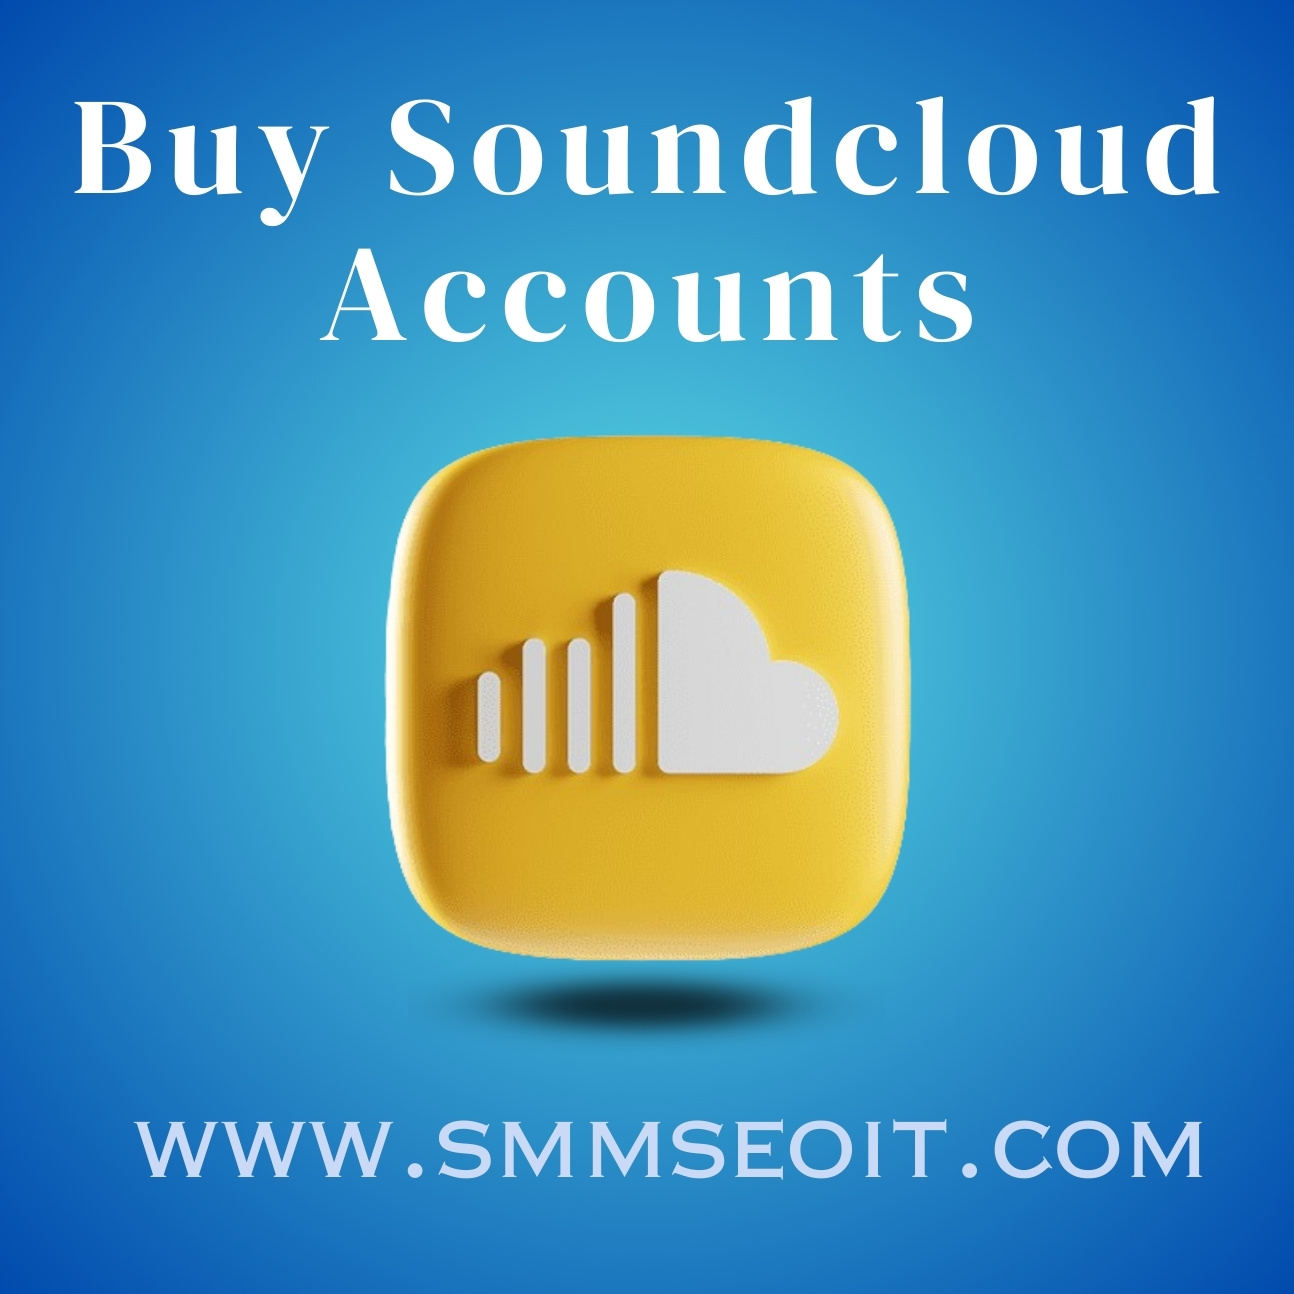 Buy Soundcloud Accounts - 100% Email Verified Account